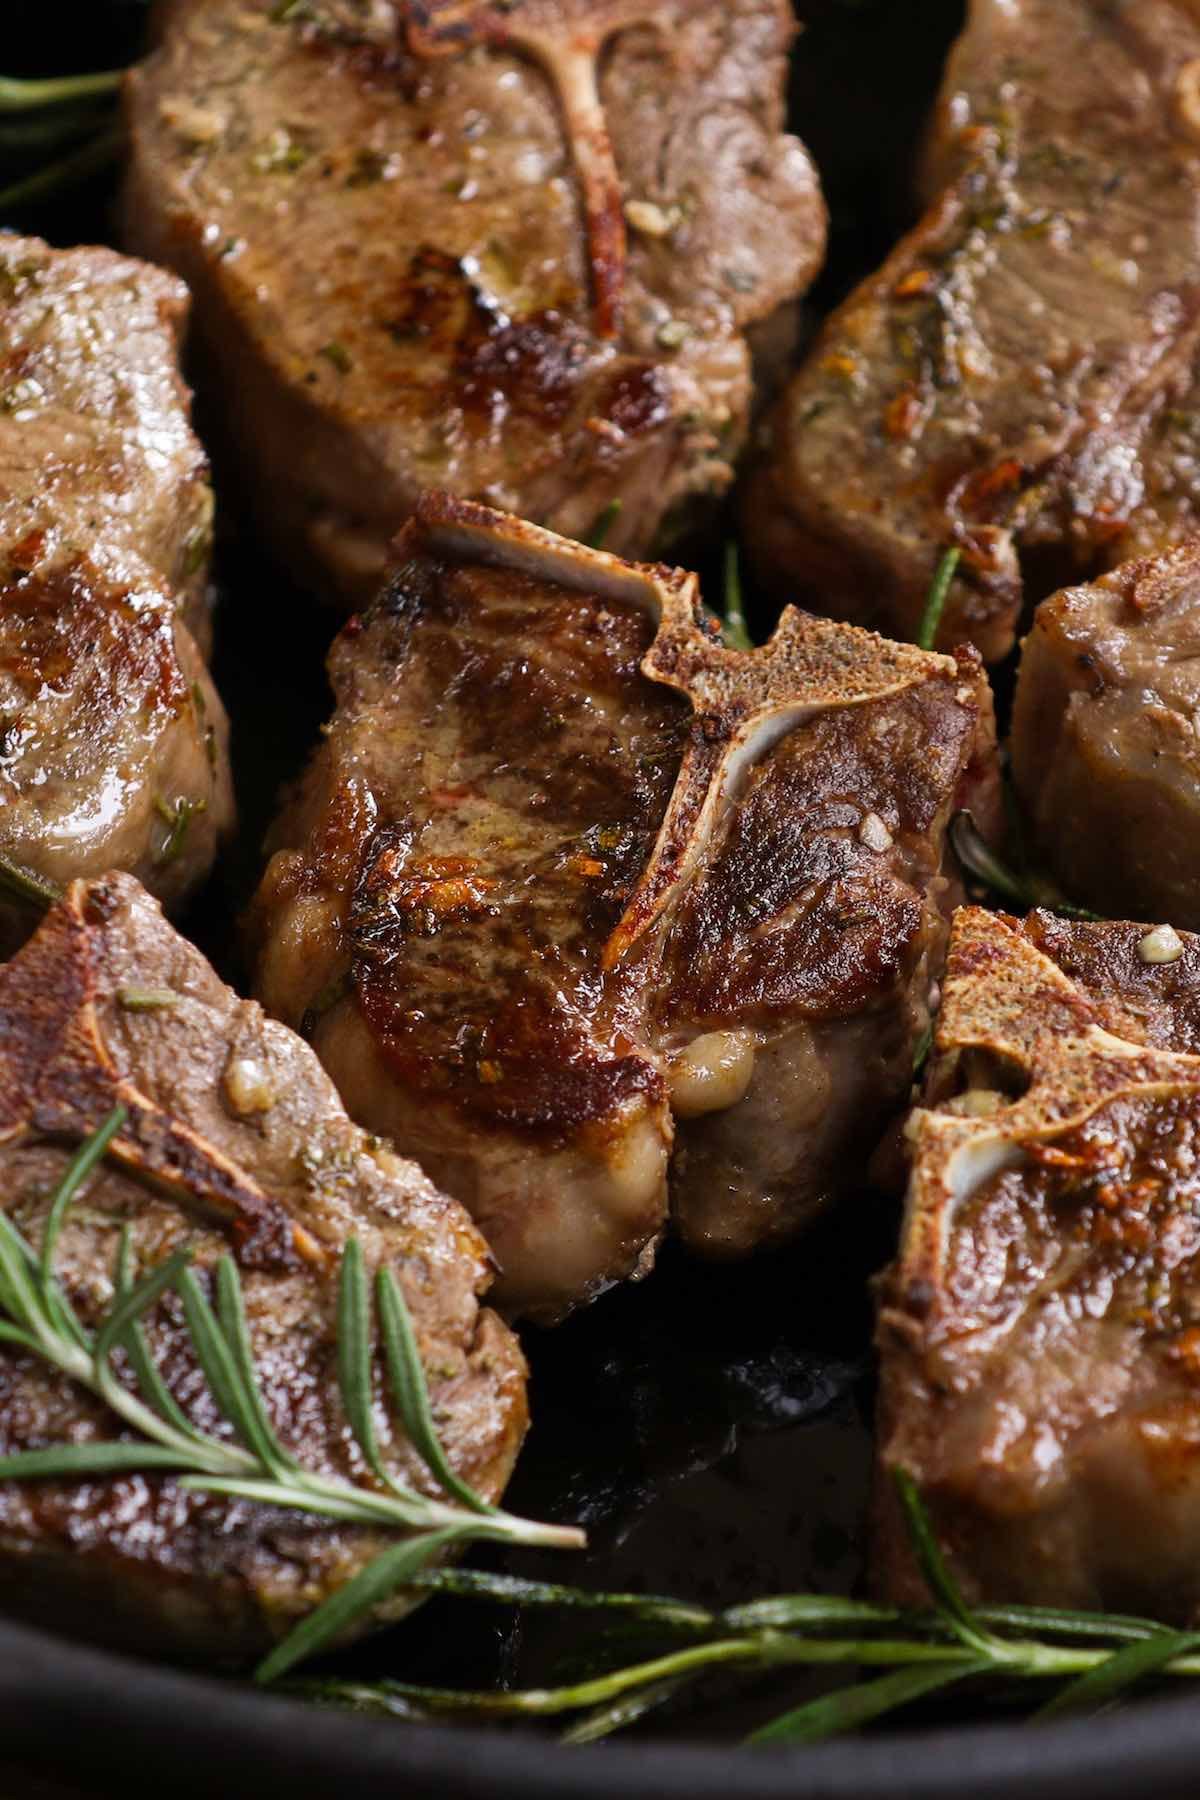 These Rosemary Garlic Sous Vide Lamb Chops are super tender and so flavorful! The sous vide technique allows you to cook better lamb chops than the restaurant. The lamb is precisely and evenly cooked to the temperature you set with your desired doneness!